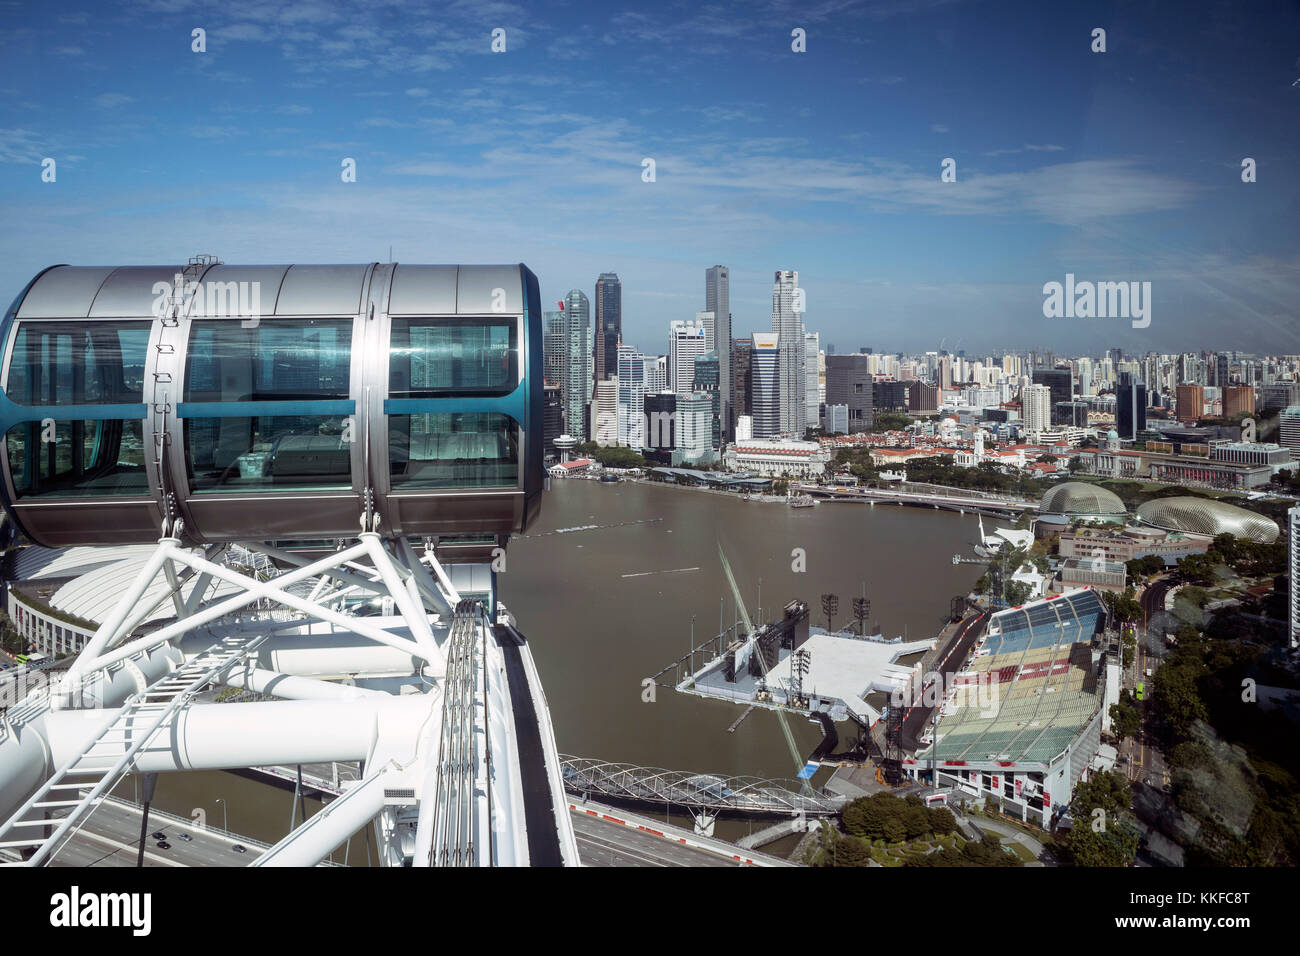 Daytime shot of  the Marina Bay area in Singapore, taken from the Singapore Flyer Wheel showing the skyline of Singapore and a pod on the flyer Stock Photo